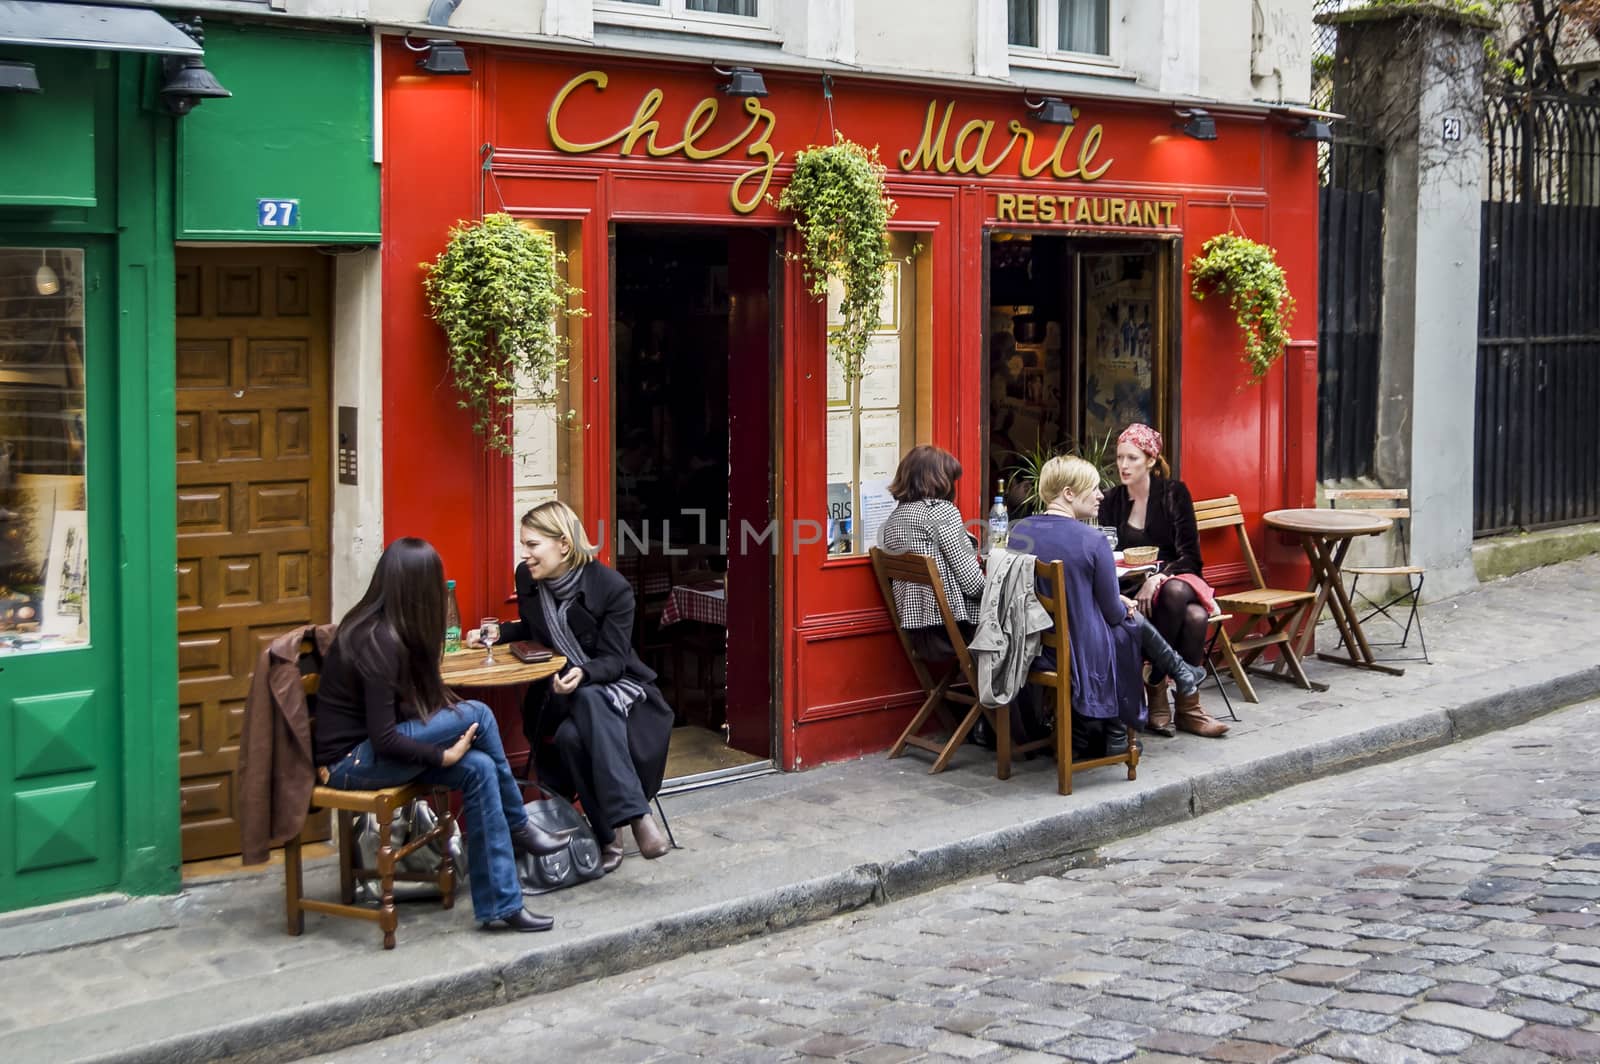 PARIS - MARCH 2: typical Paris cafe with people that enjoy dinner on March 2, 2014 in Paris, France